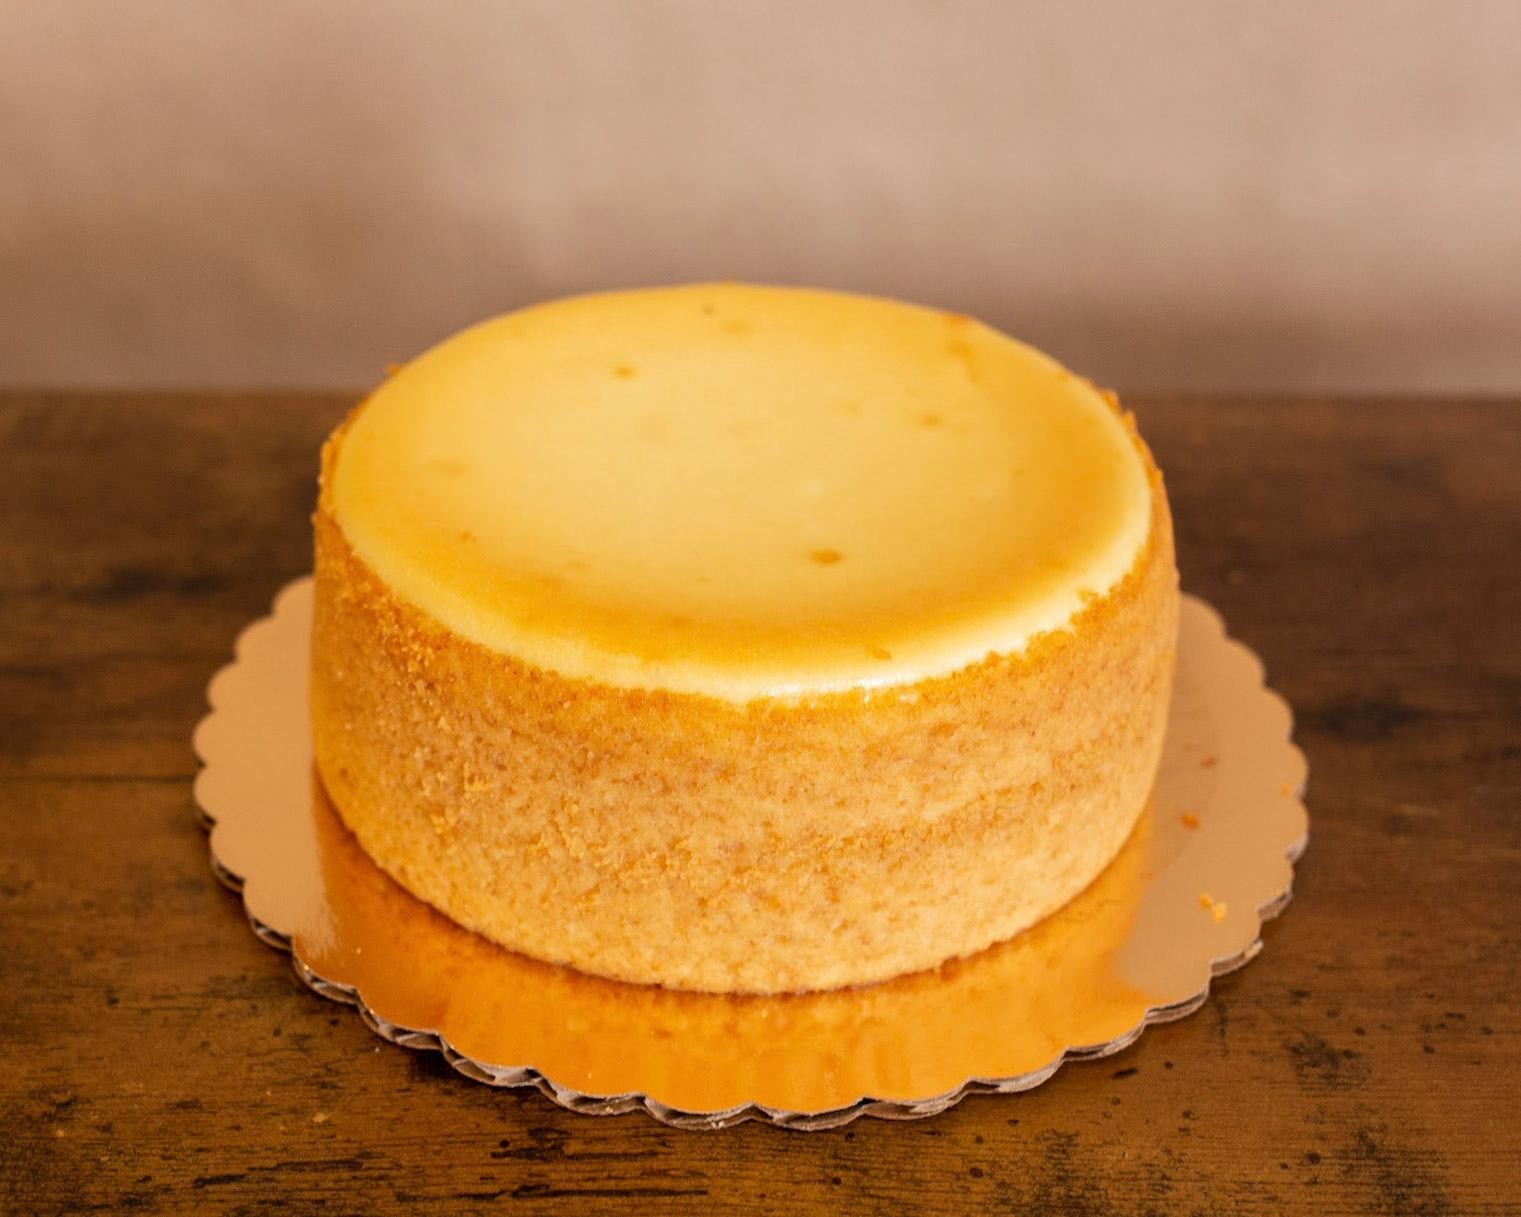 Cheesecake - 6" Traditional